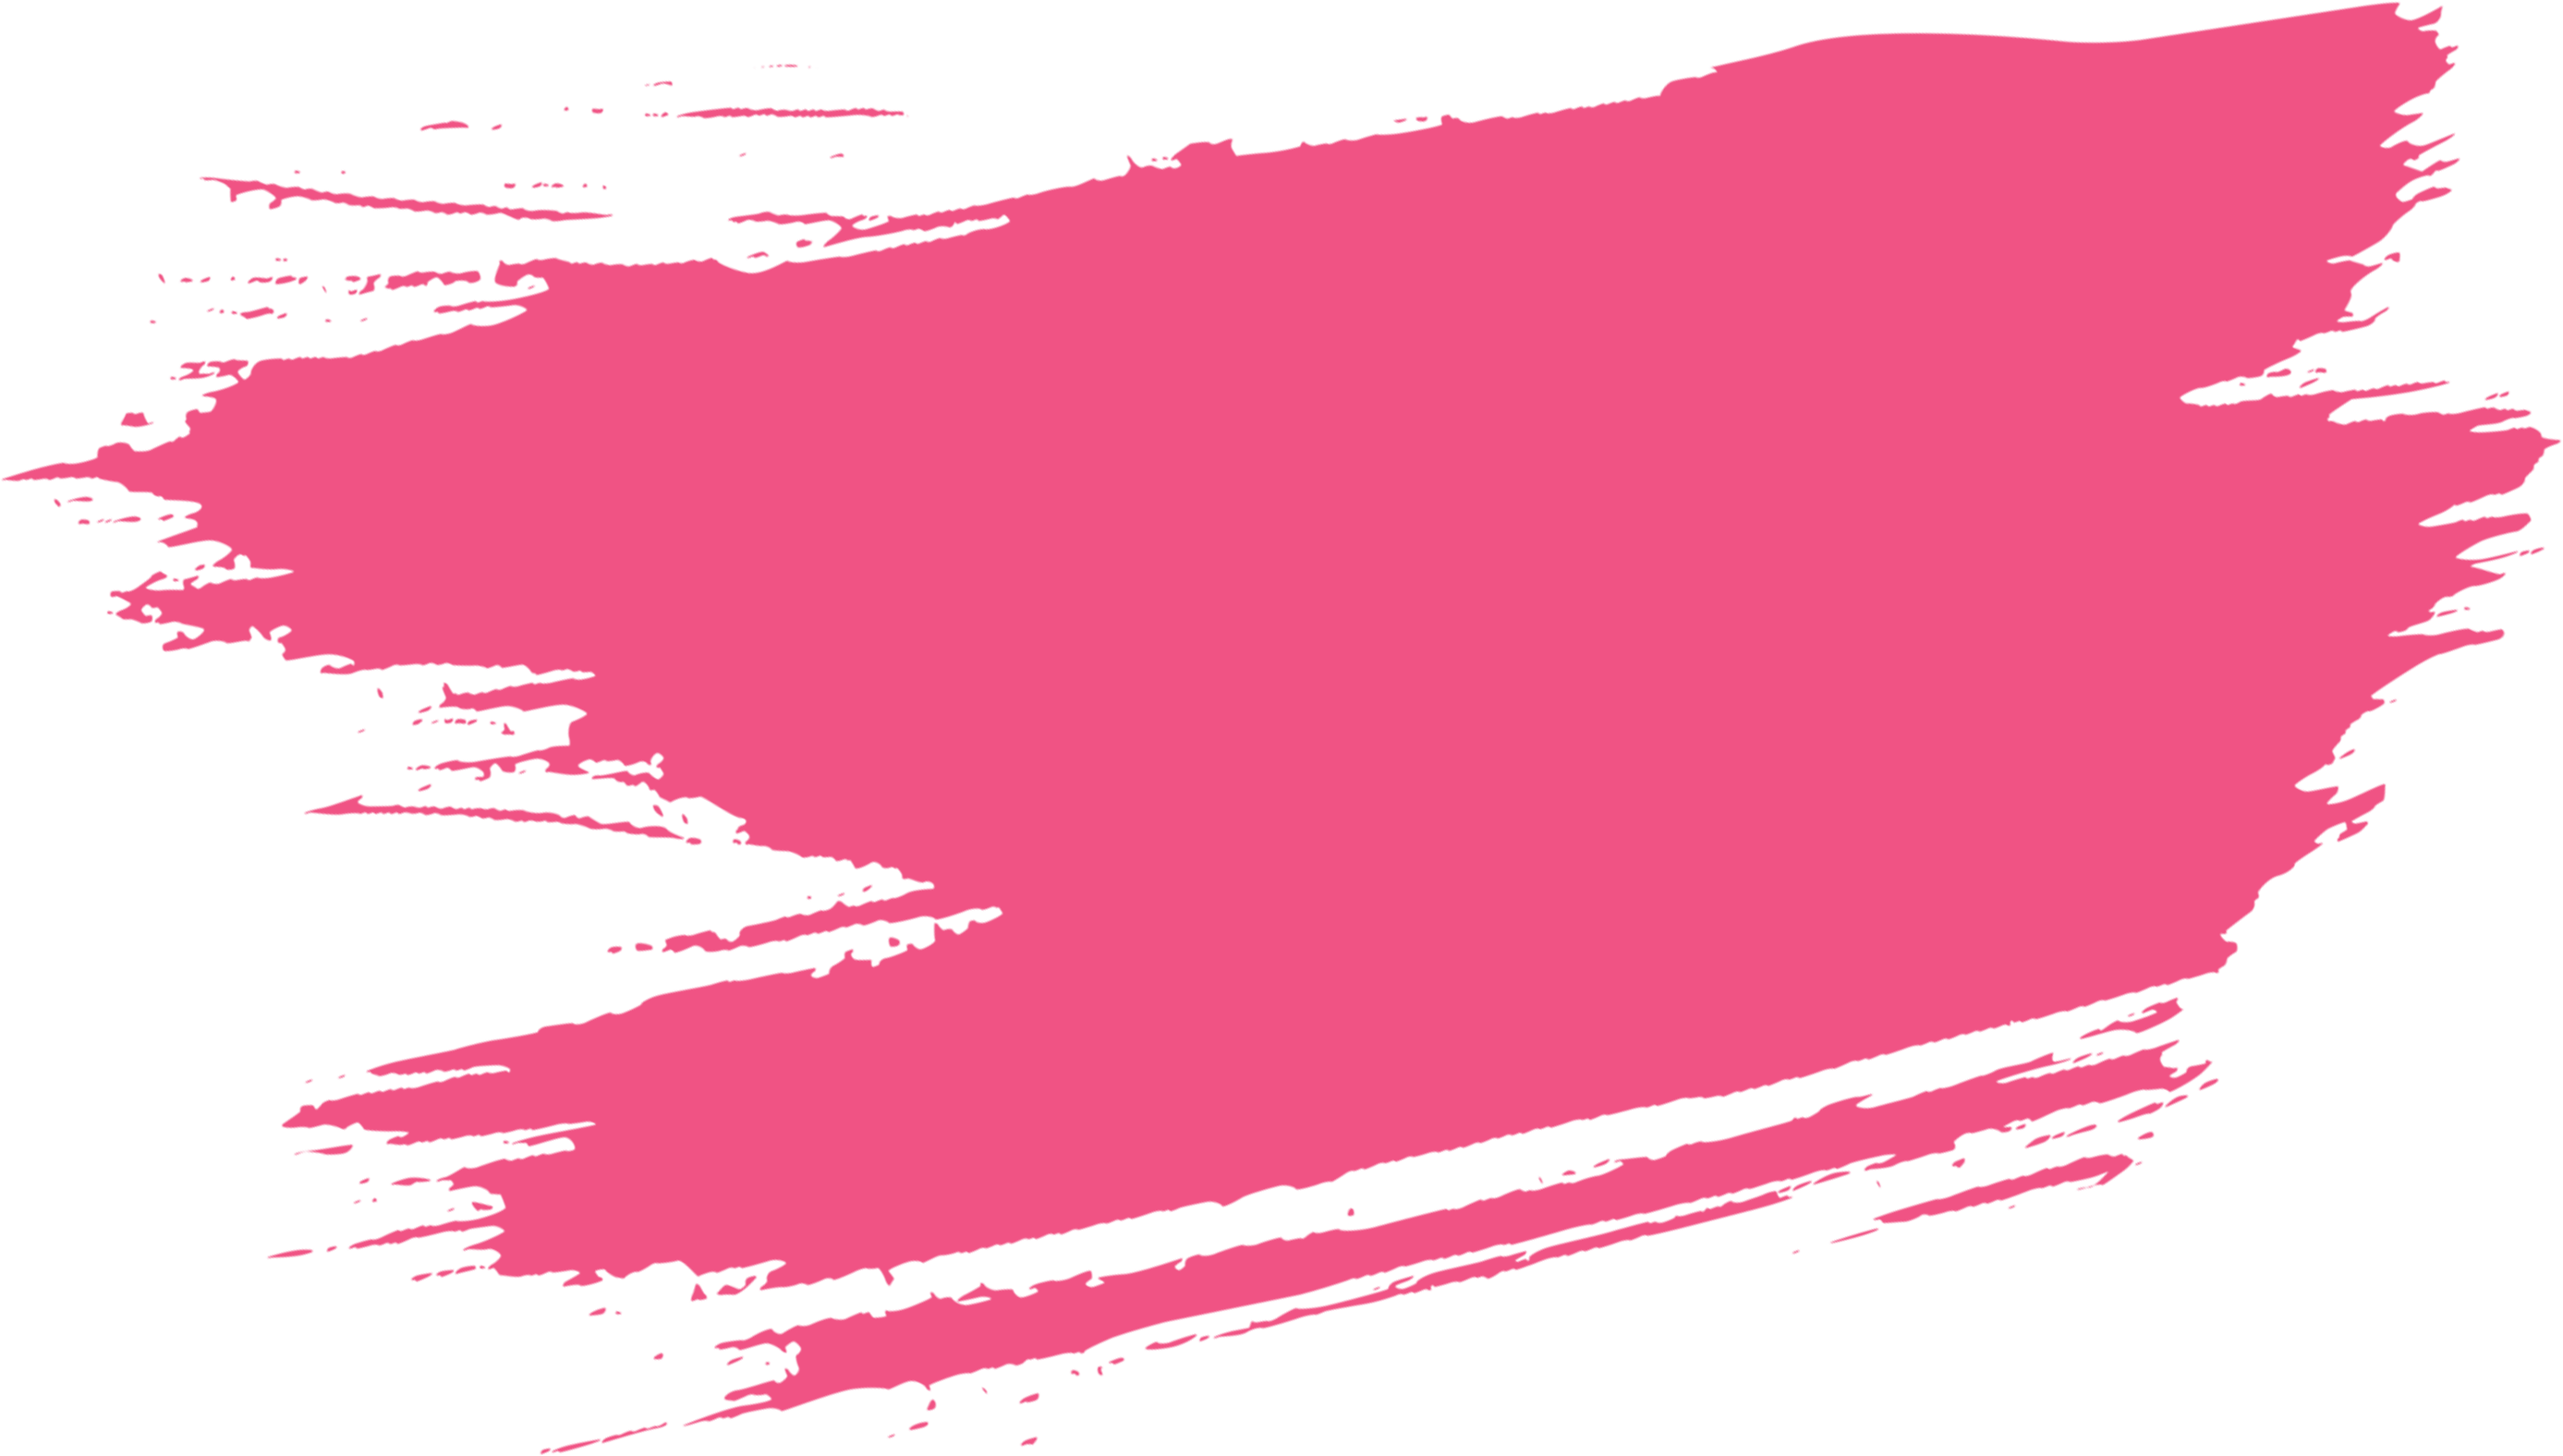 A Pink Rectangular Object With Black Background